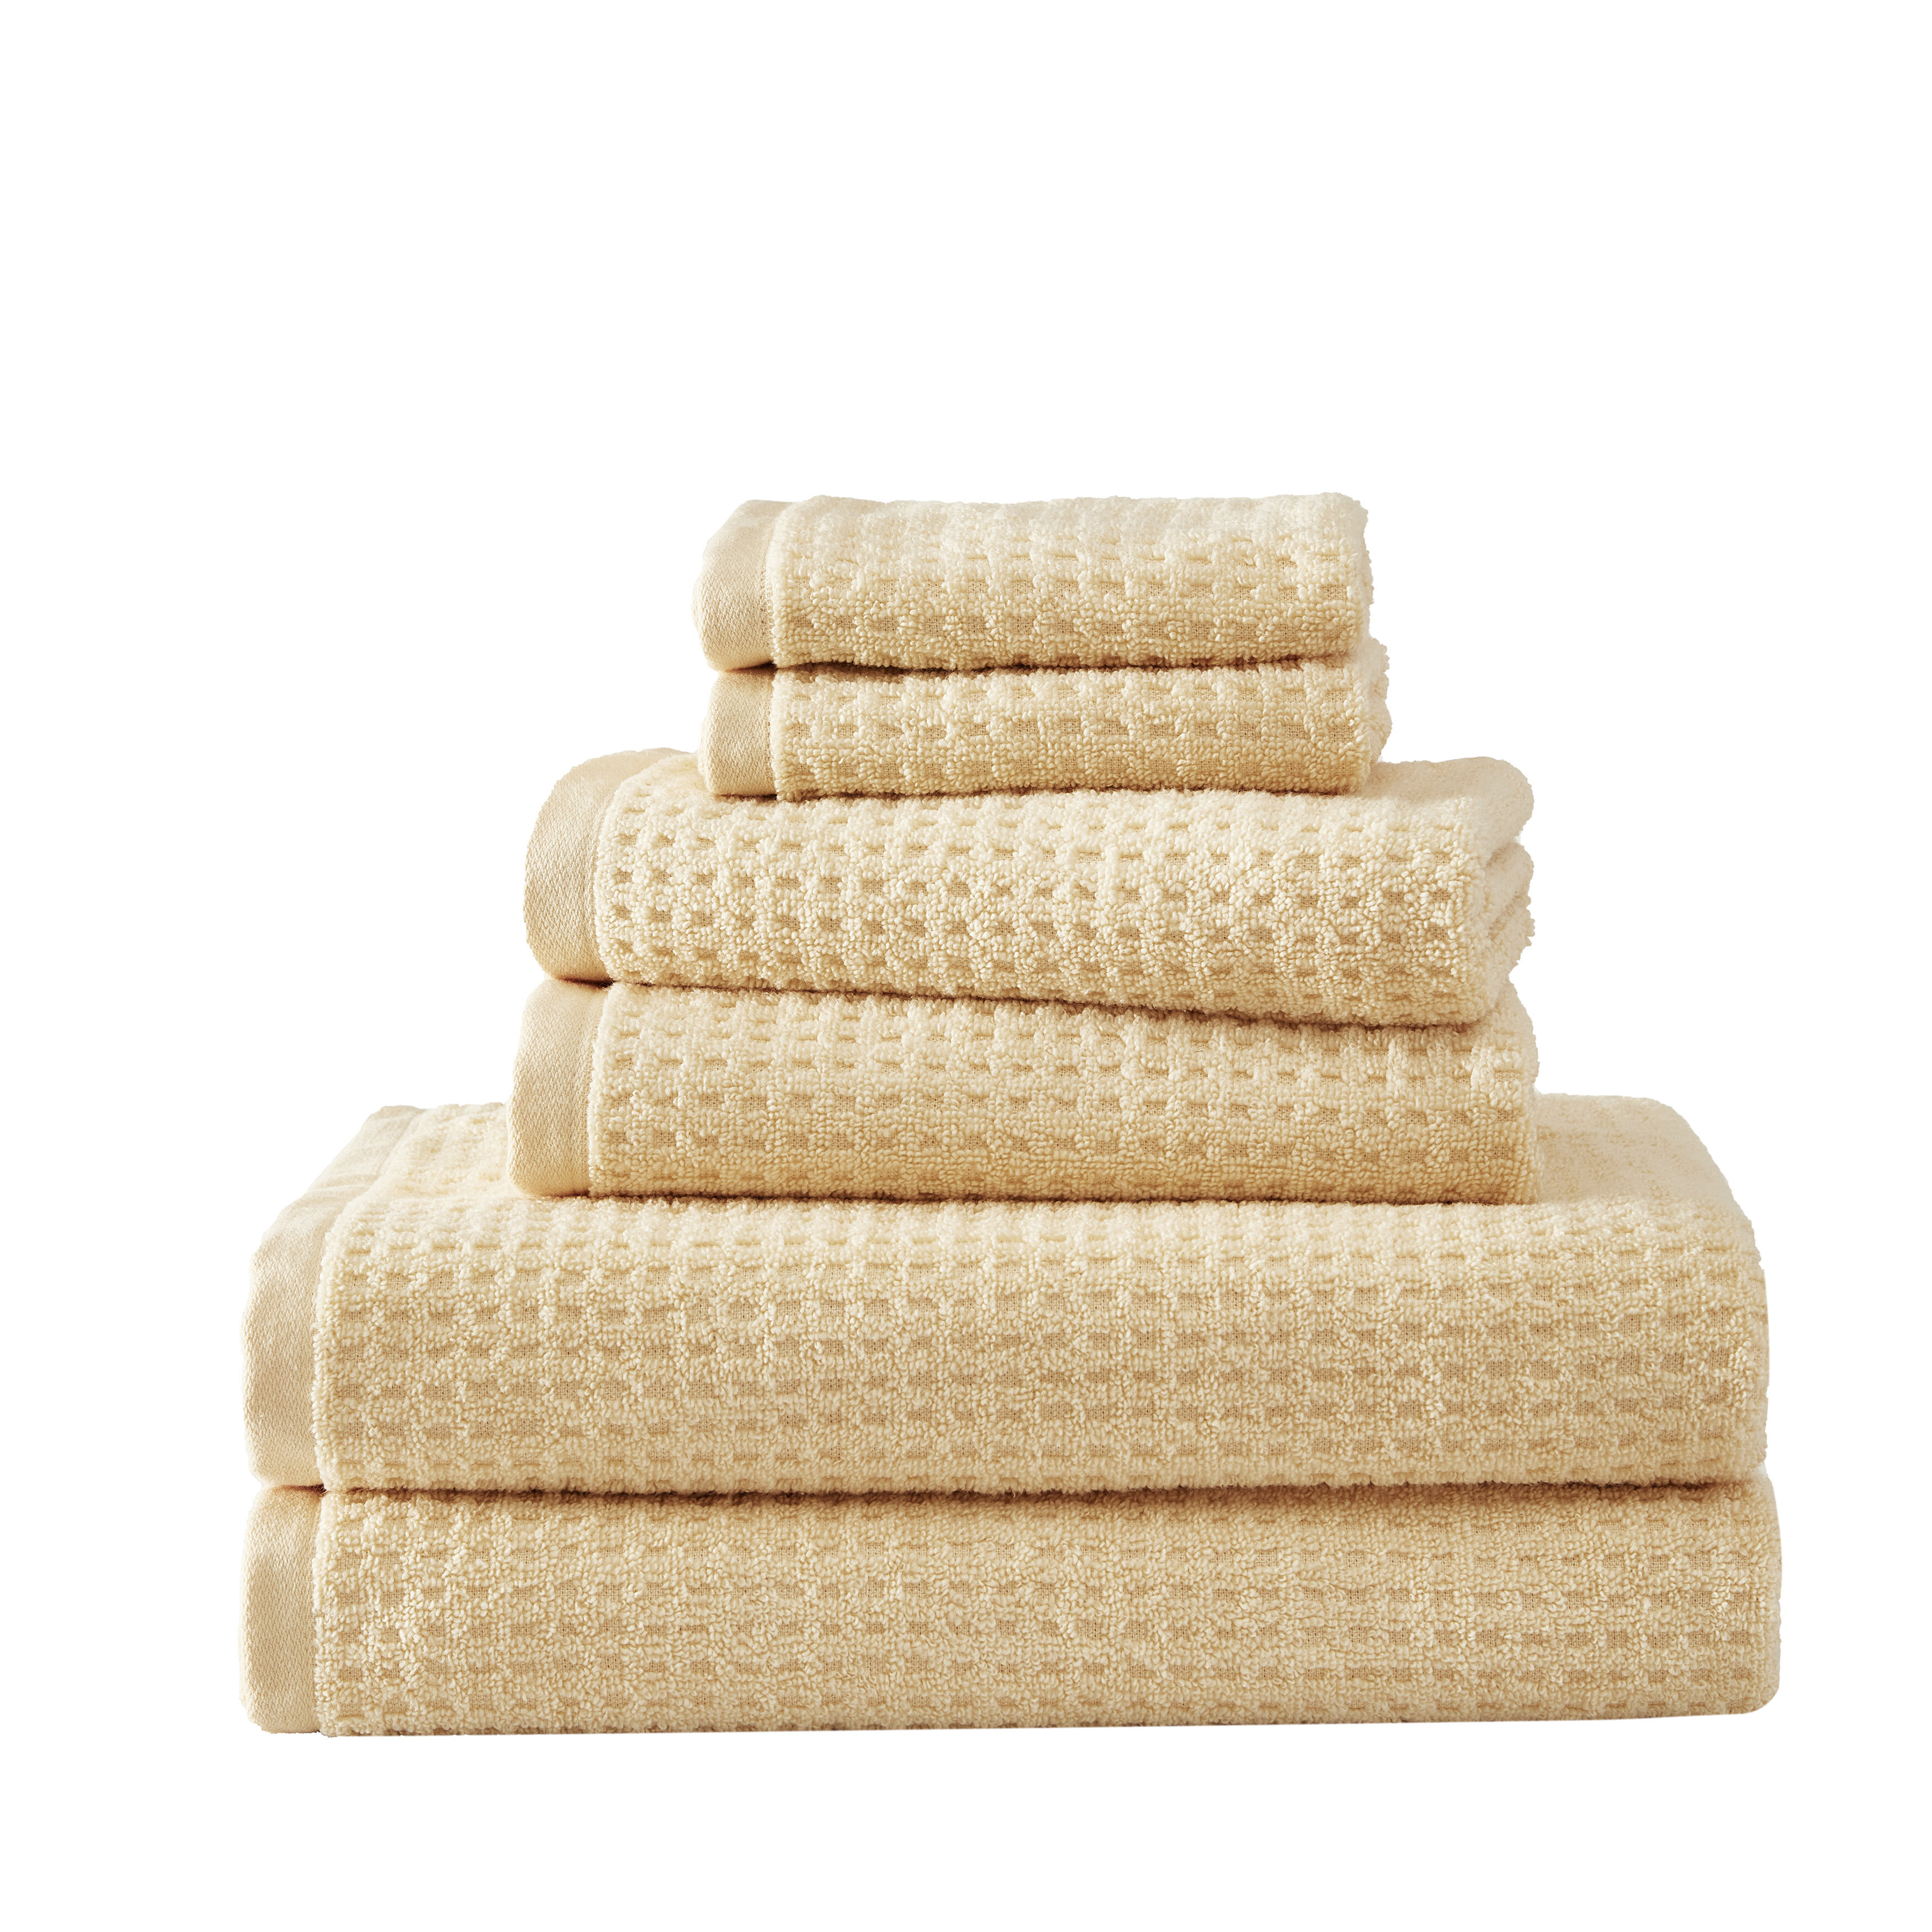 2/4 pcs, Super Absorbent Bamboo Cloth Towel Set - Microfiber Dish Towels  for Cleaning and Drying - Solid Color Square Towels, Durable - Essential Cle